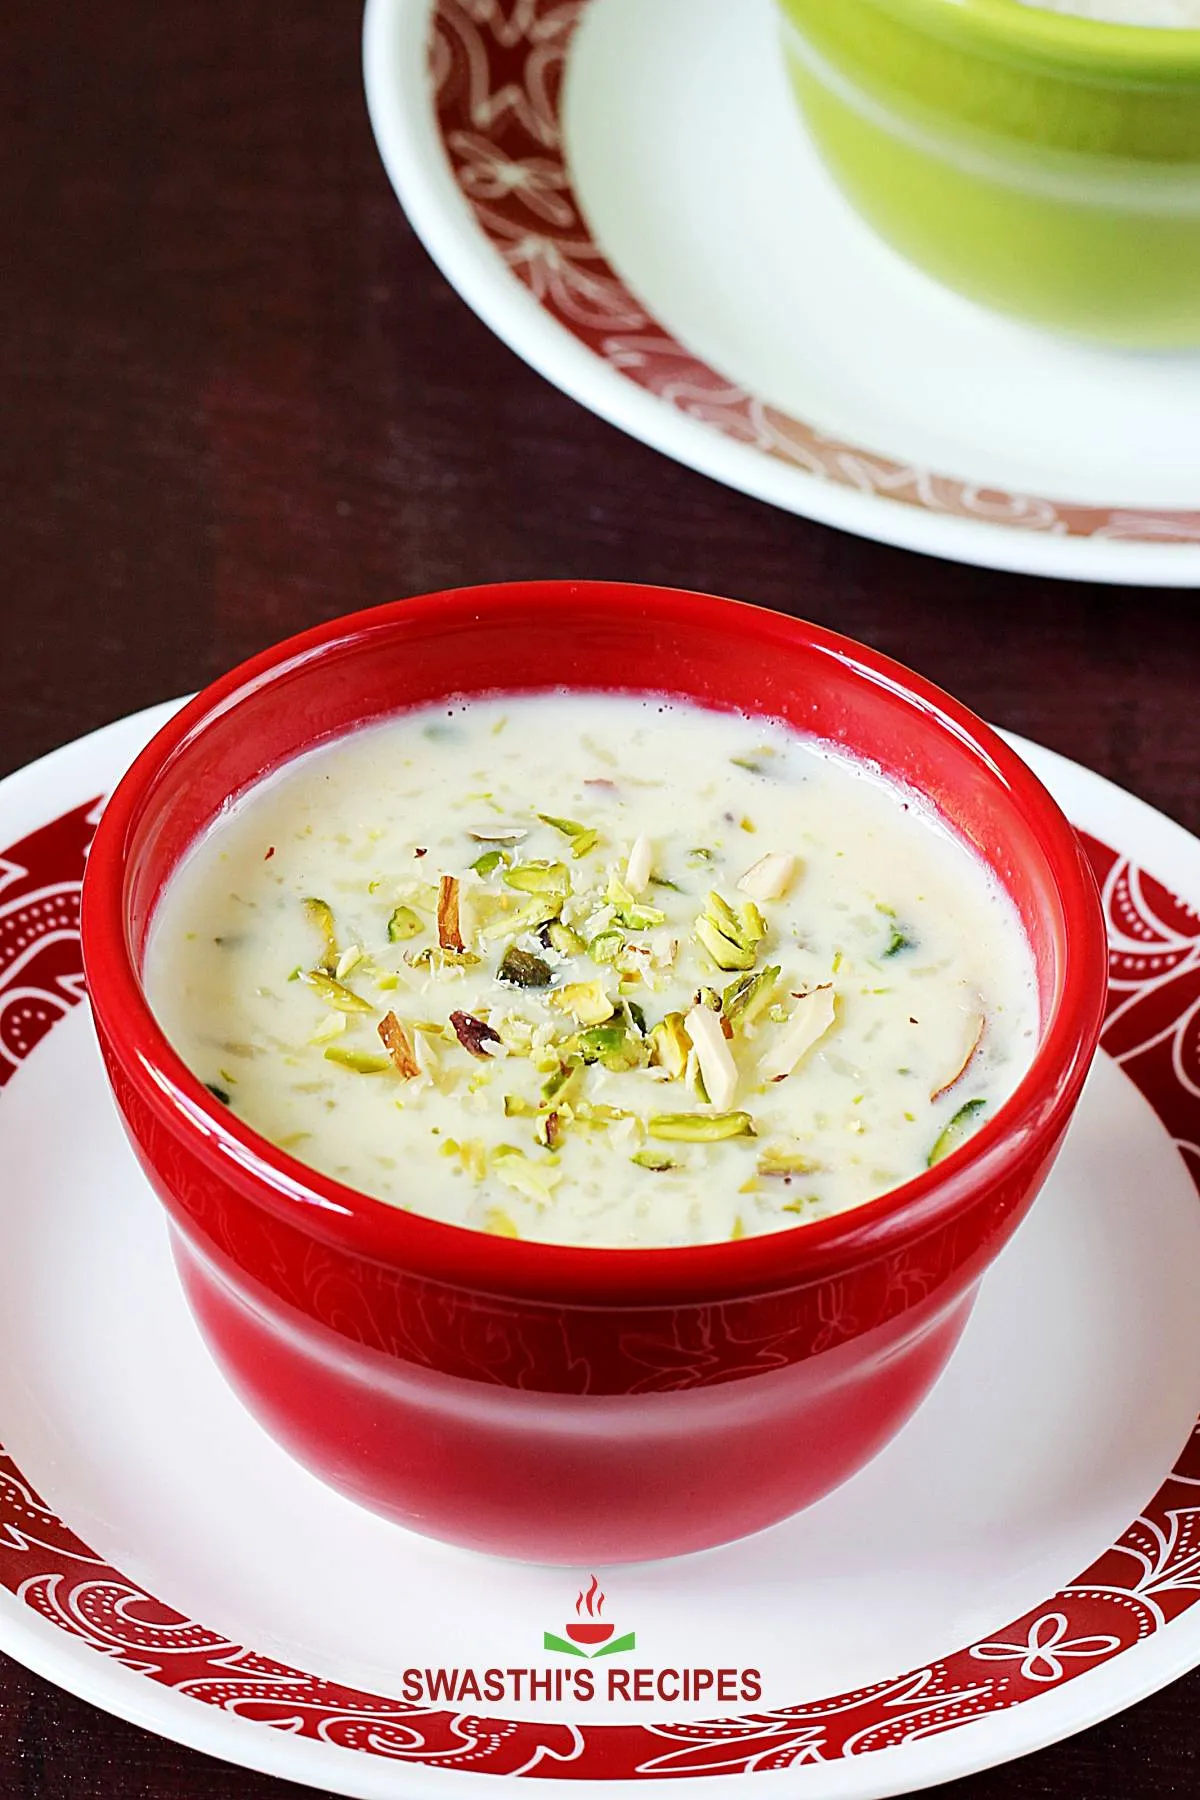 kheer recipe - rice kheer served in a bowl garnished with nuts